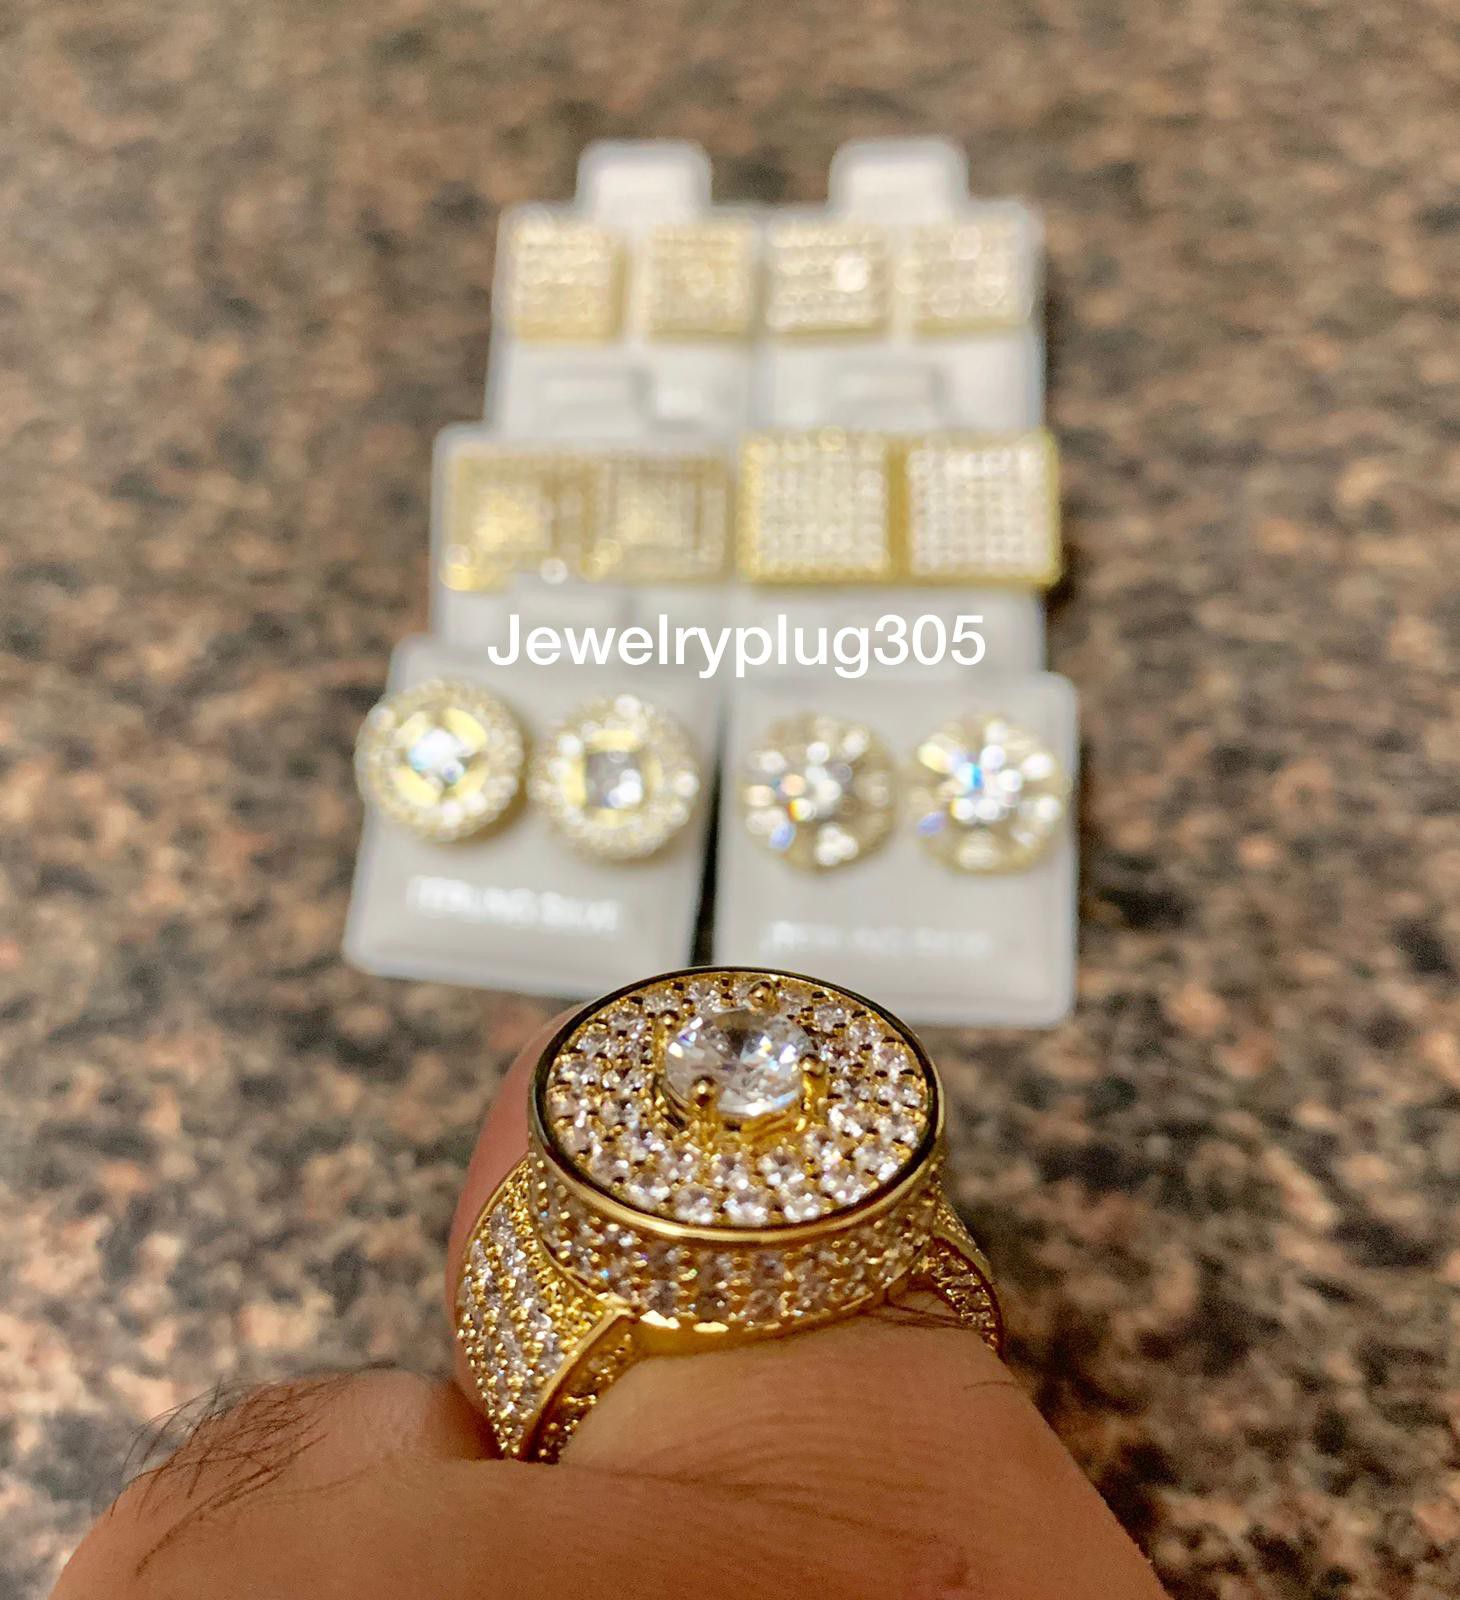 BEST PRICES 🙌 BETTER QUALITY 👏, CHECK US OUT ON INSTAGRAM @Jewelryplug305  WE DELIVER AND DO SHIPPING ,High Quality Plated Jewelry Looks real 💯